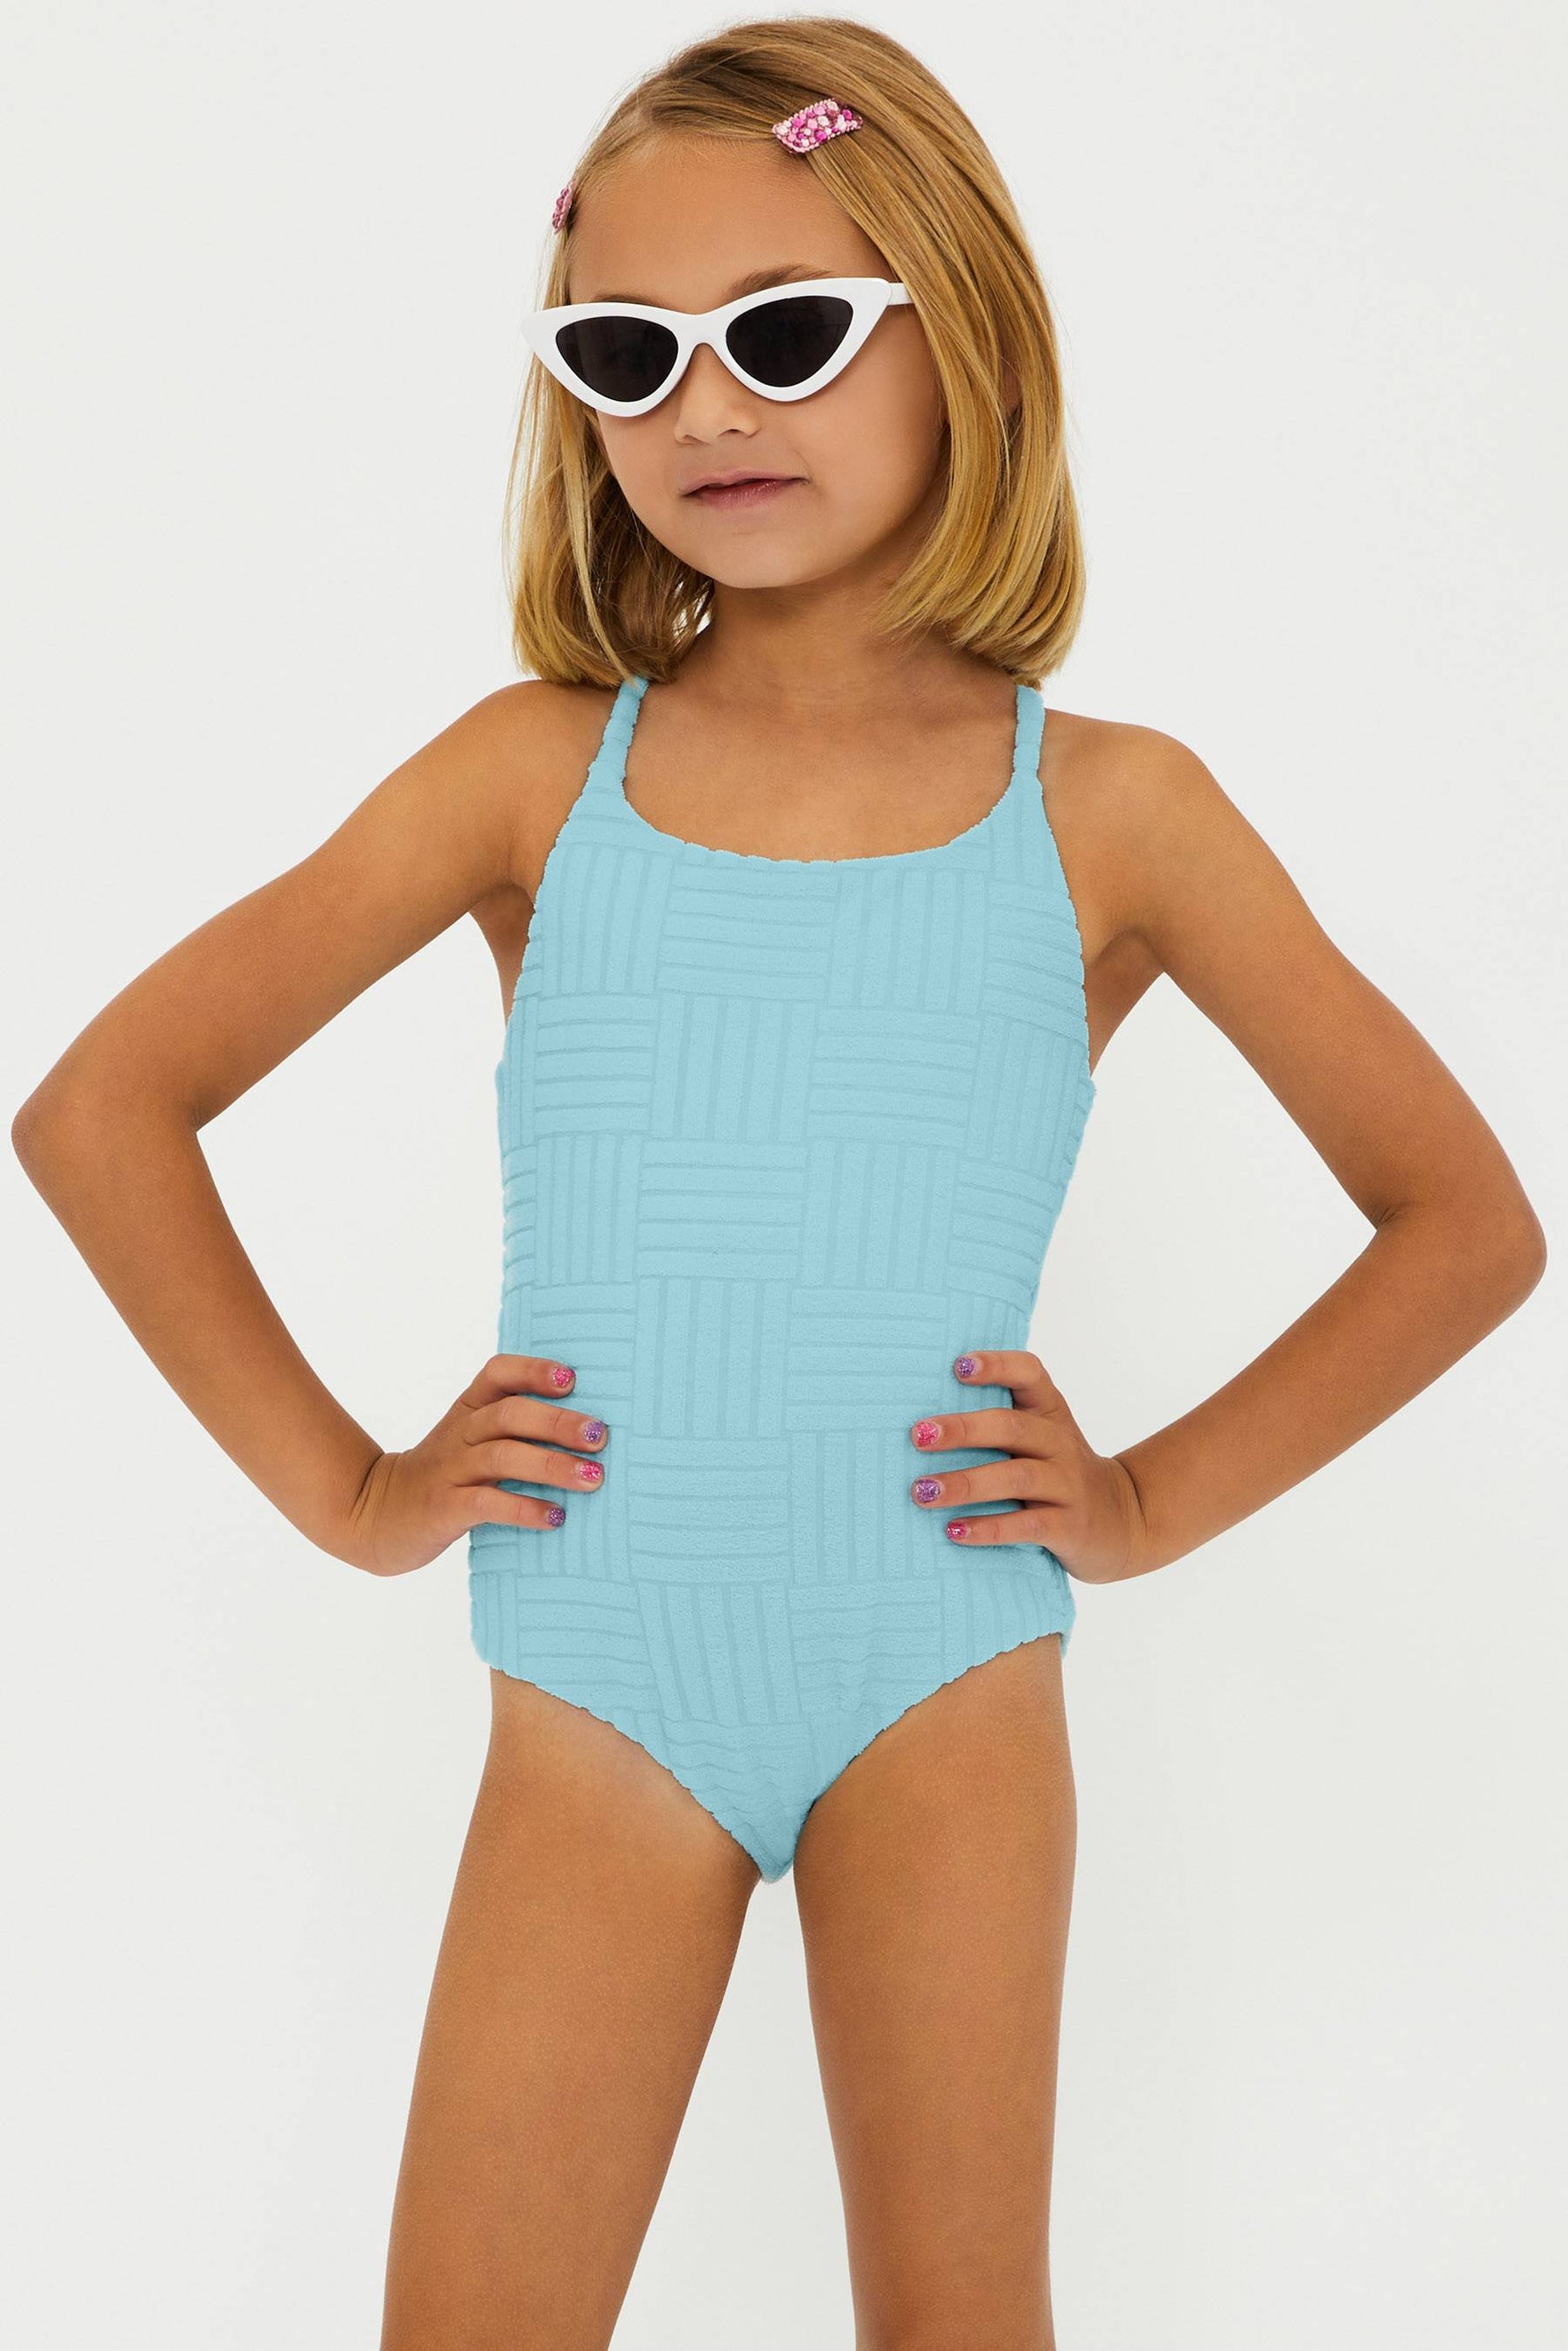 BABY BLUE TERRY LITTLE GIRLS ONE PIECE SWIMSUIT